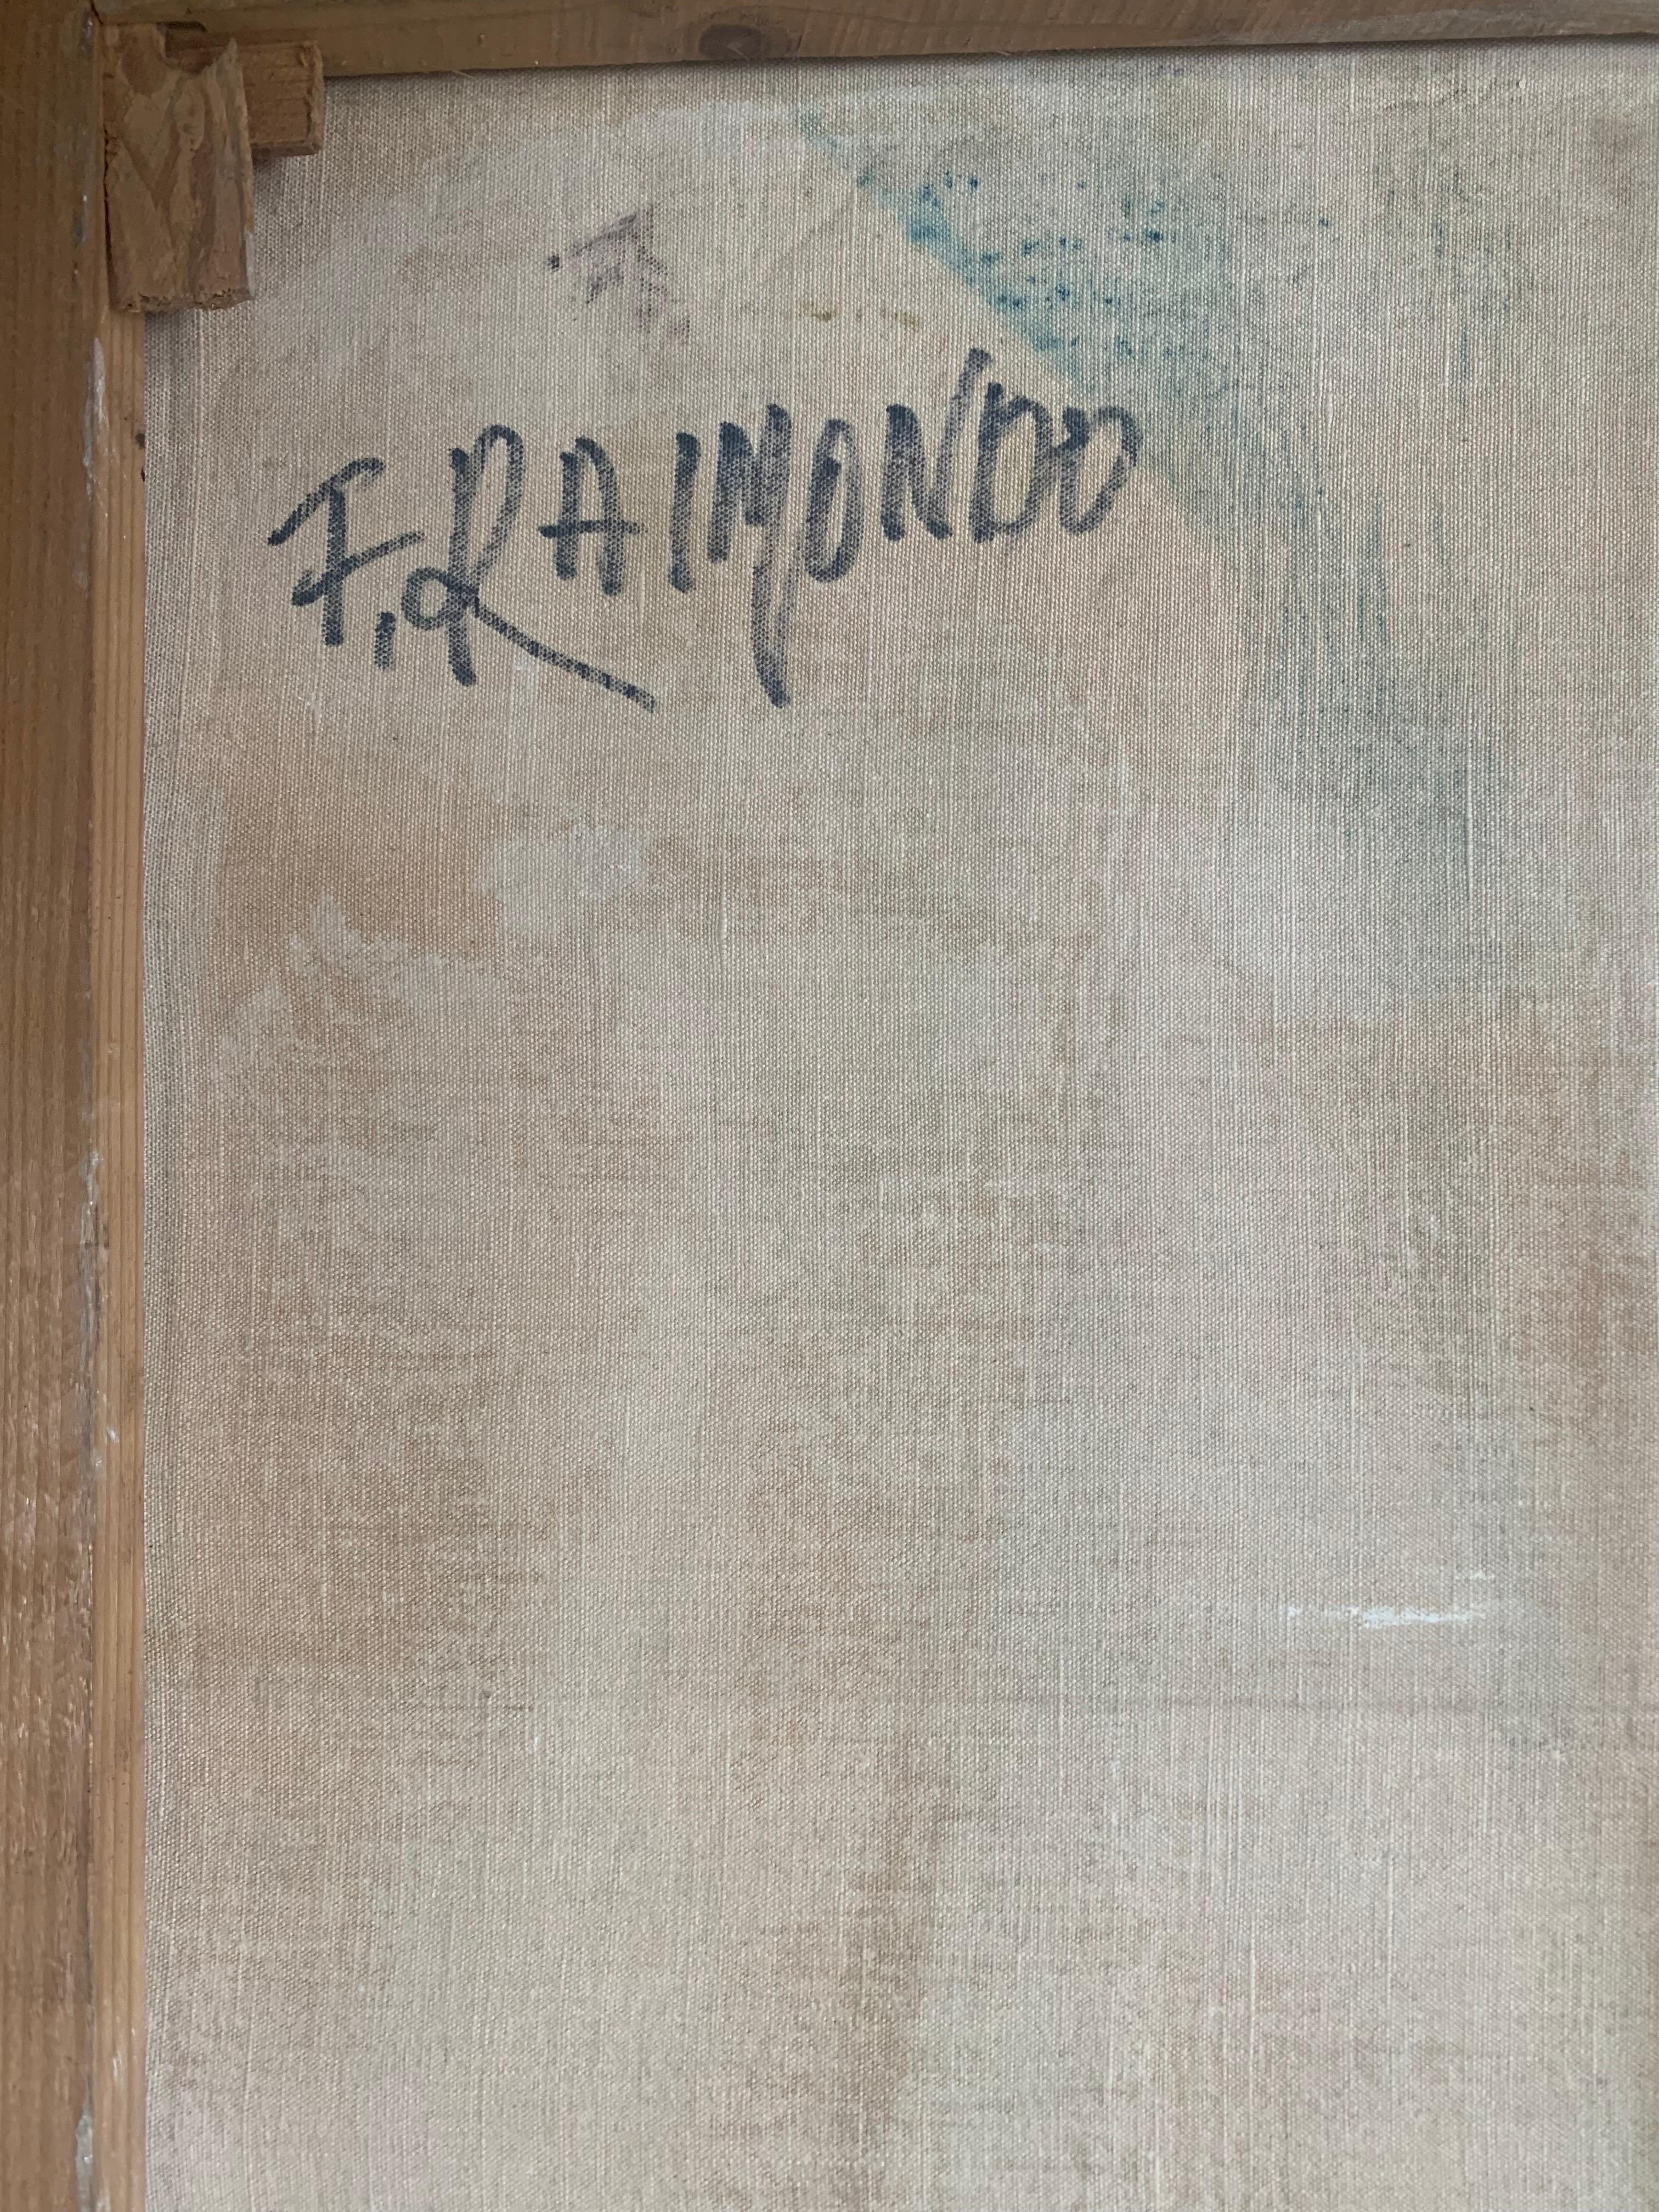 Abstract Painting With Rolled painter's Canvases. 1970.  Signed F. Raimondo in vendita 3